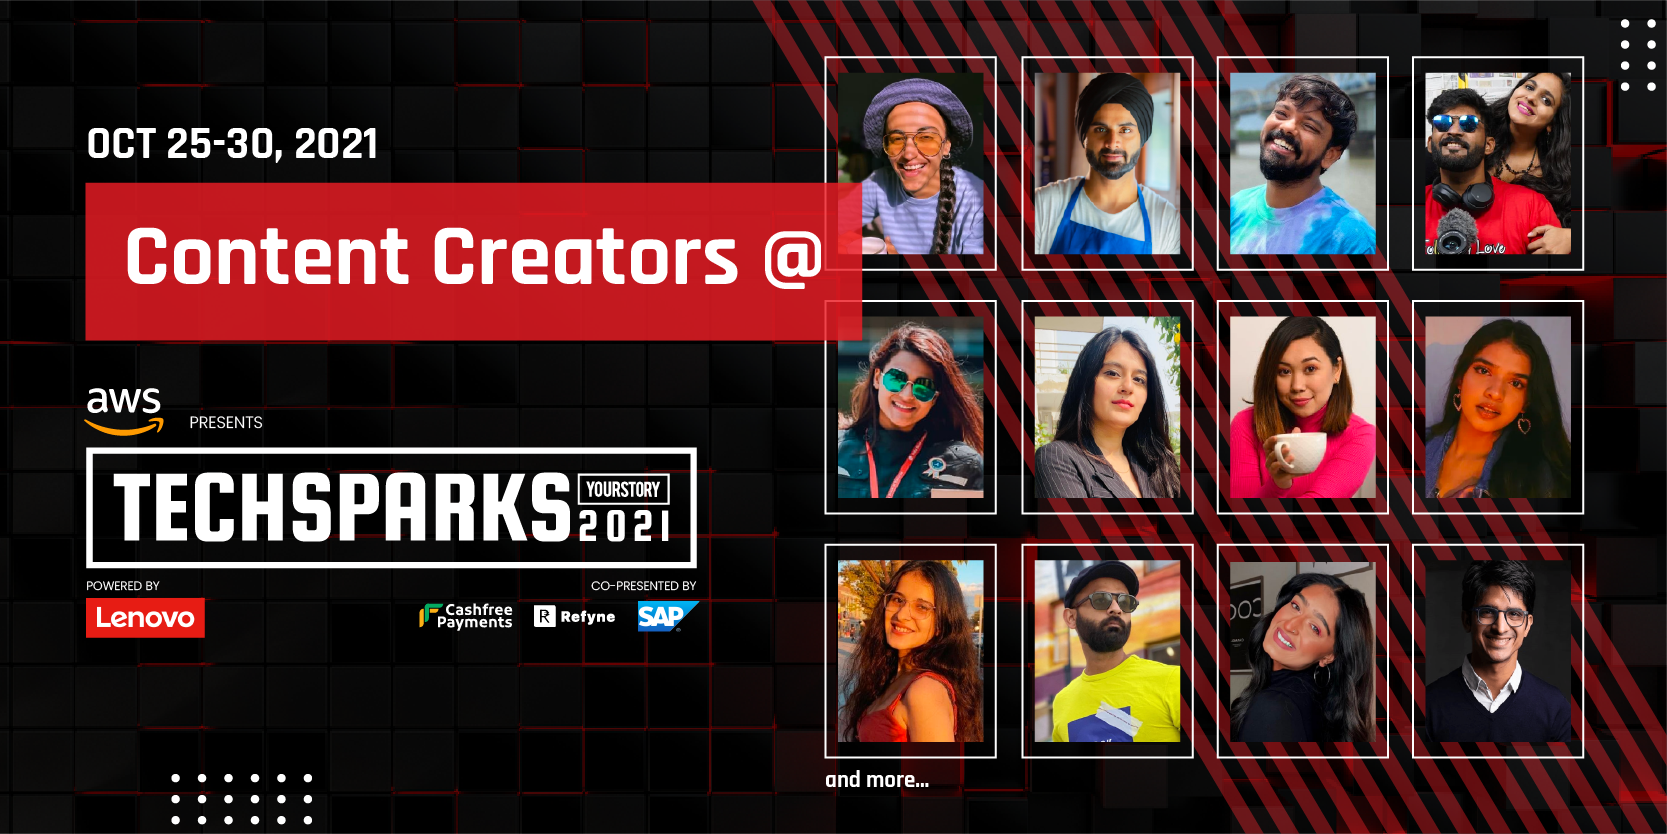 From women bikers and financiers, to a Masterchef contestant drumming up delicacies on YouTube: Meet the content creators taking the stage TechSparks 2021
